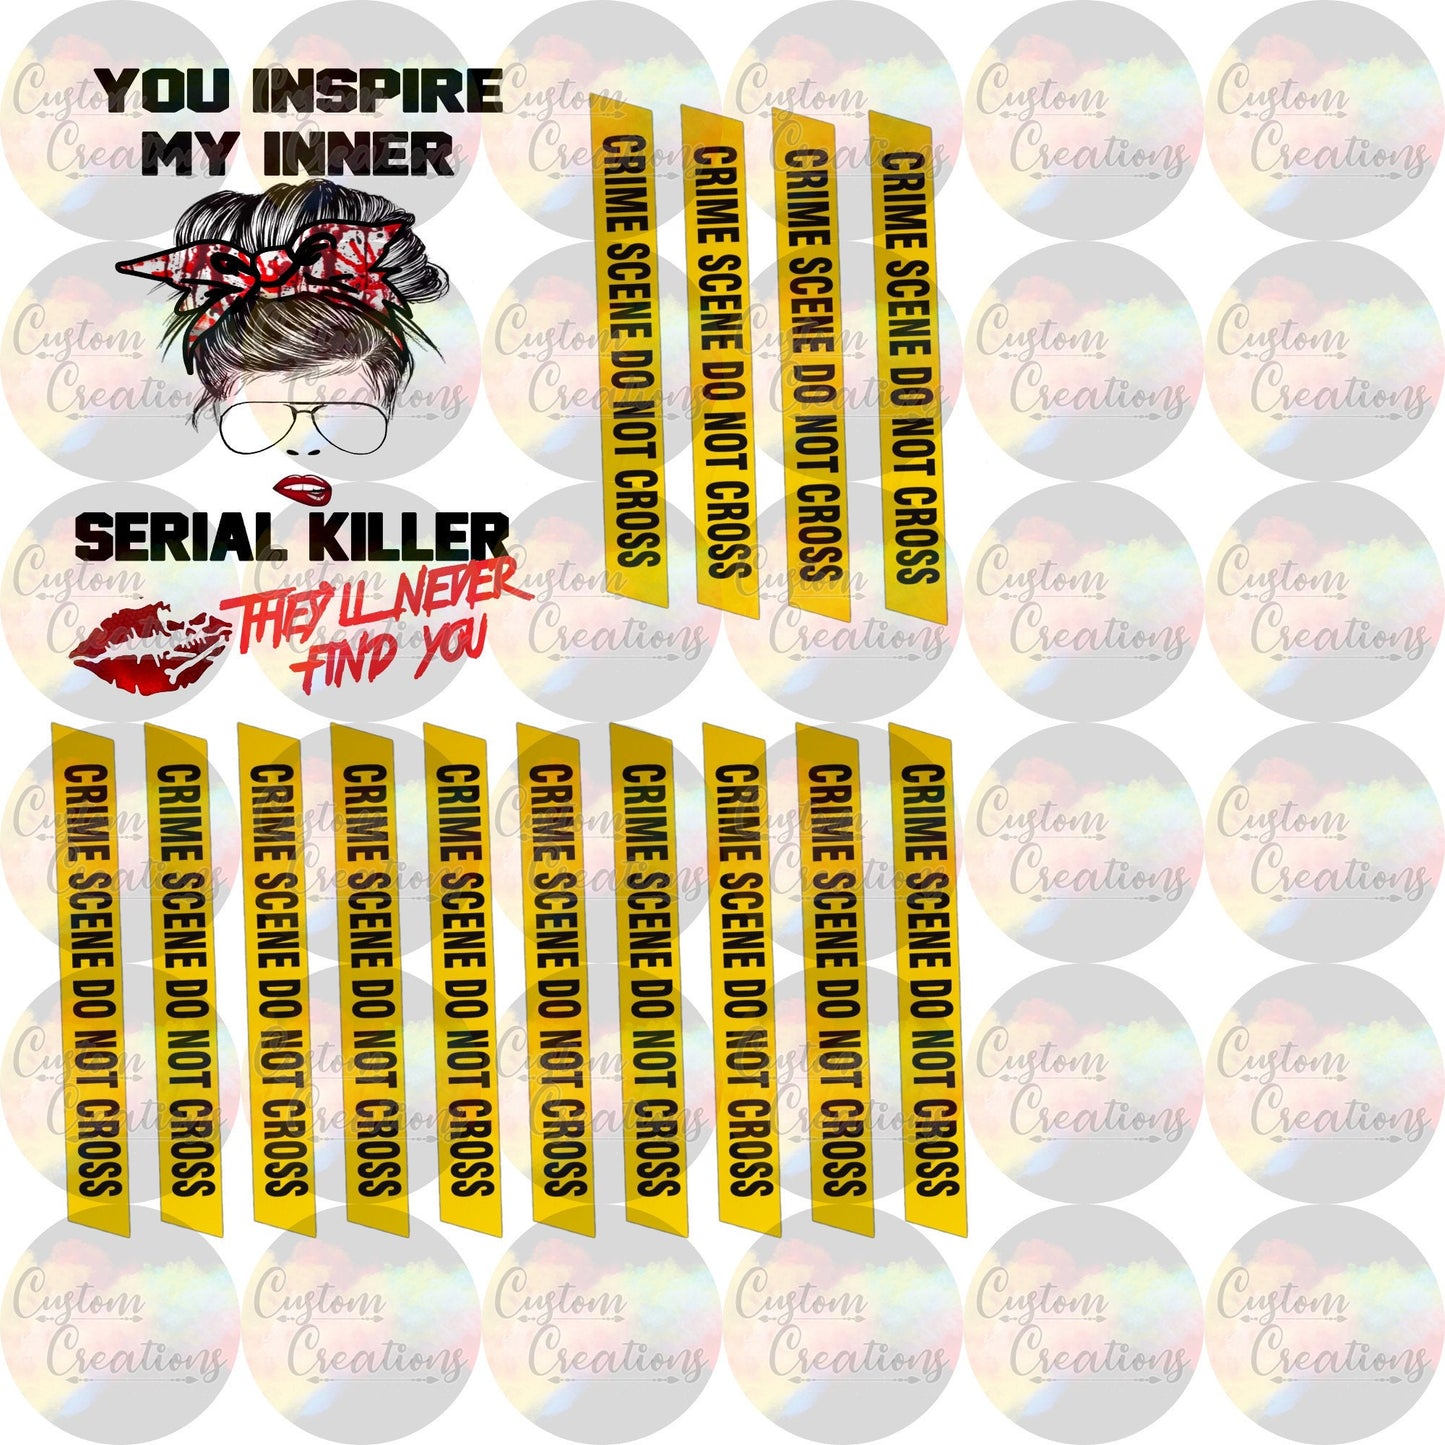 You Inspire My Inner Serial Killer Live Box Print Lips With Caution Tape Print 3.5" PRINTED ON WHITE Laser Printed Waterslide